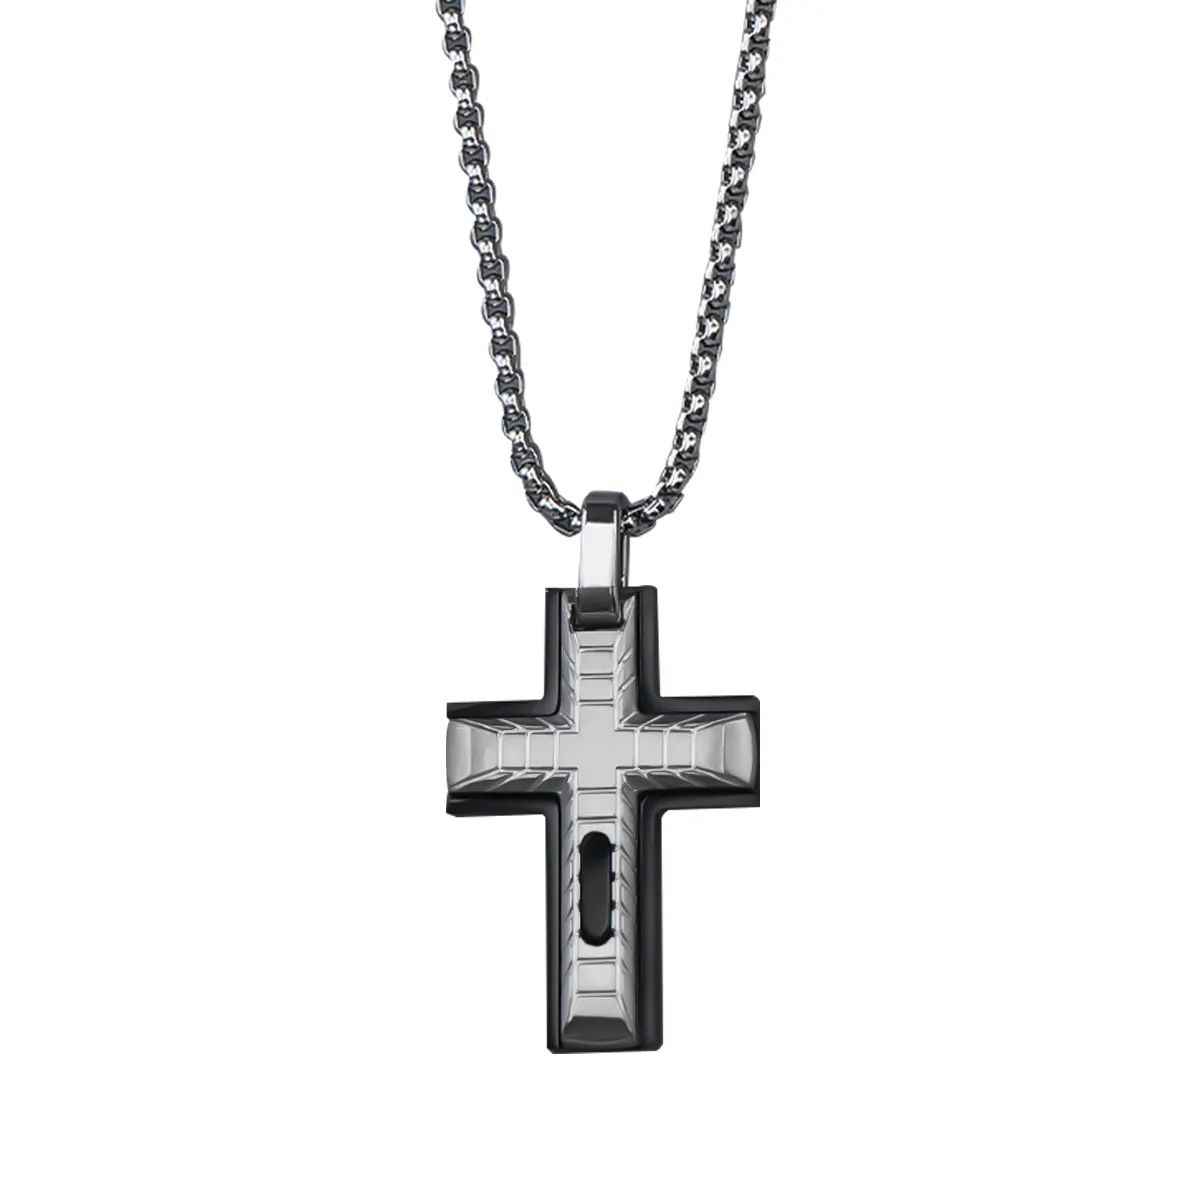 High Quality Fashion Stainless Steel Cross Pendant Necklace For Women Men Silver Black Chain Prayer Choker Jewelry